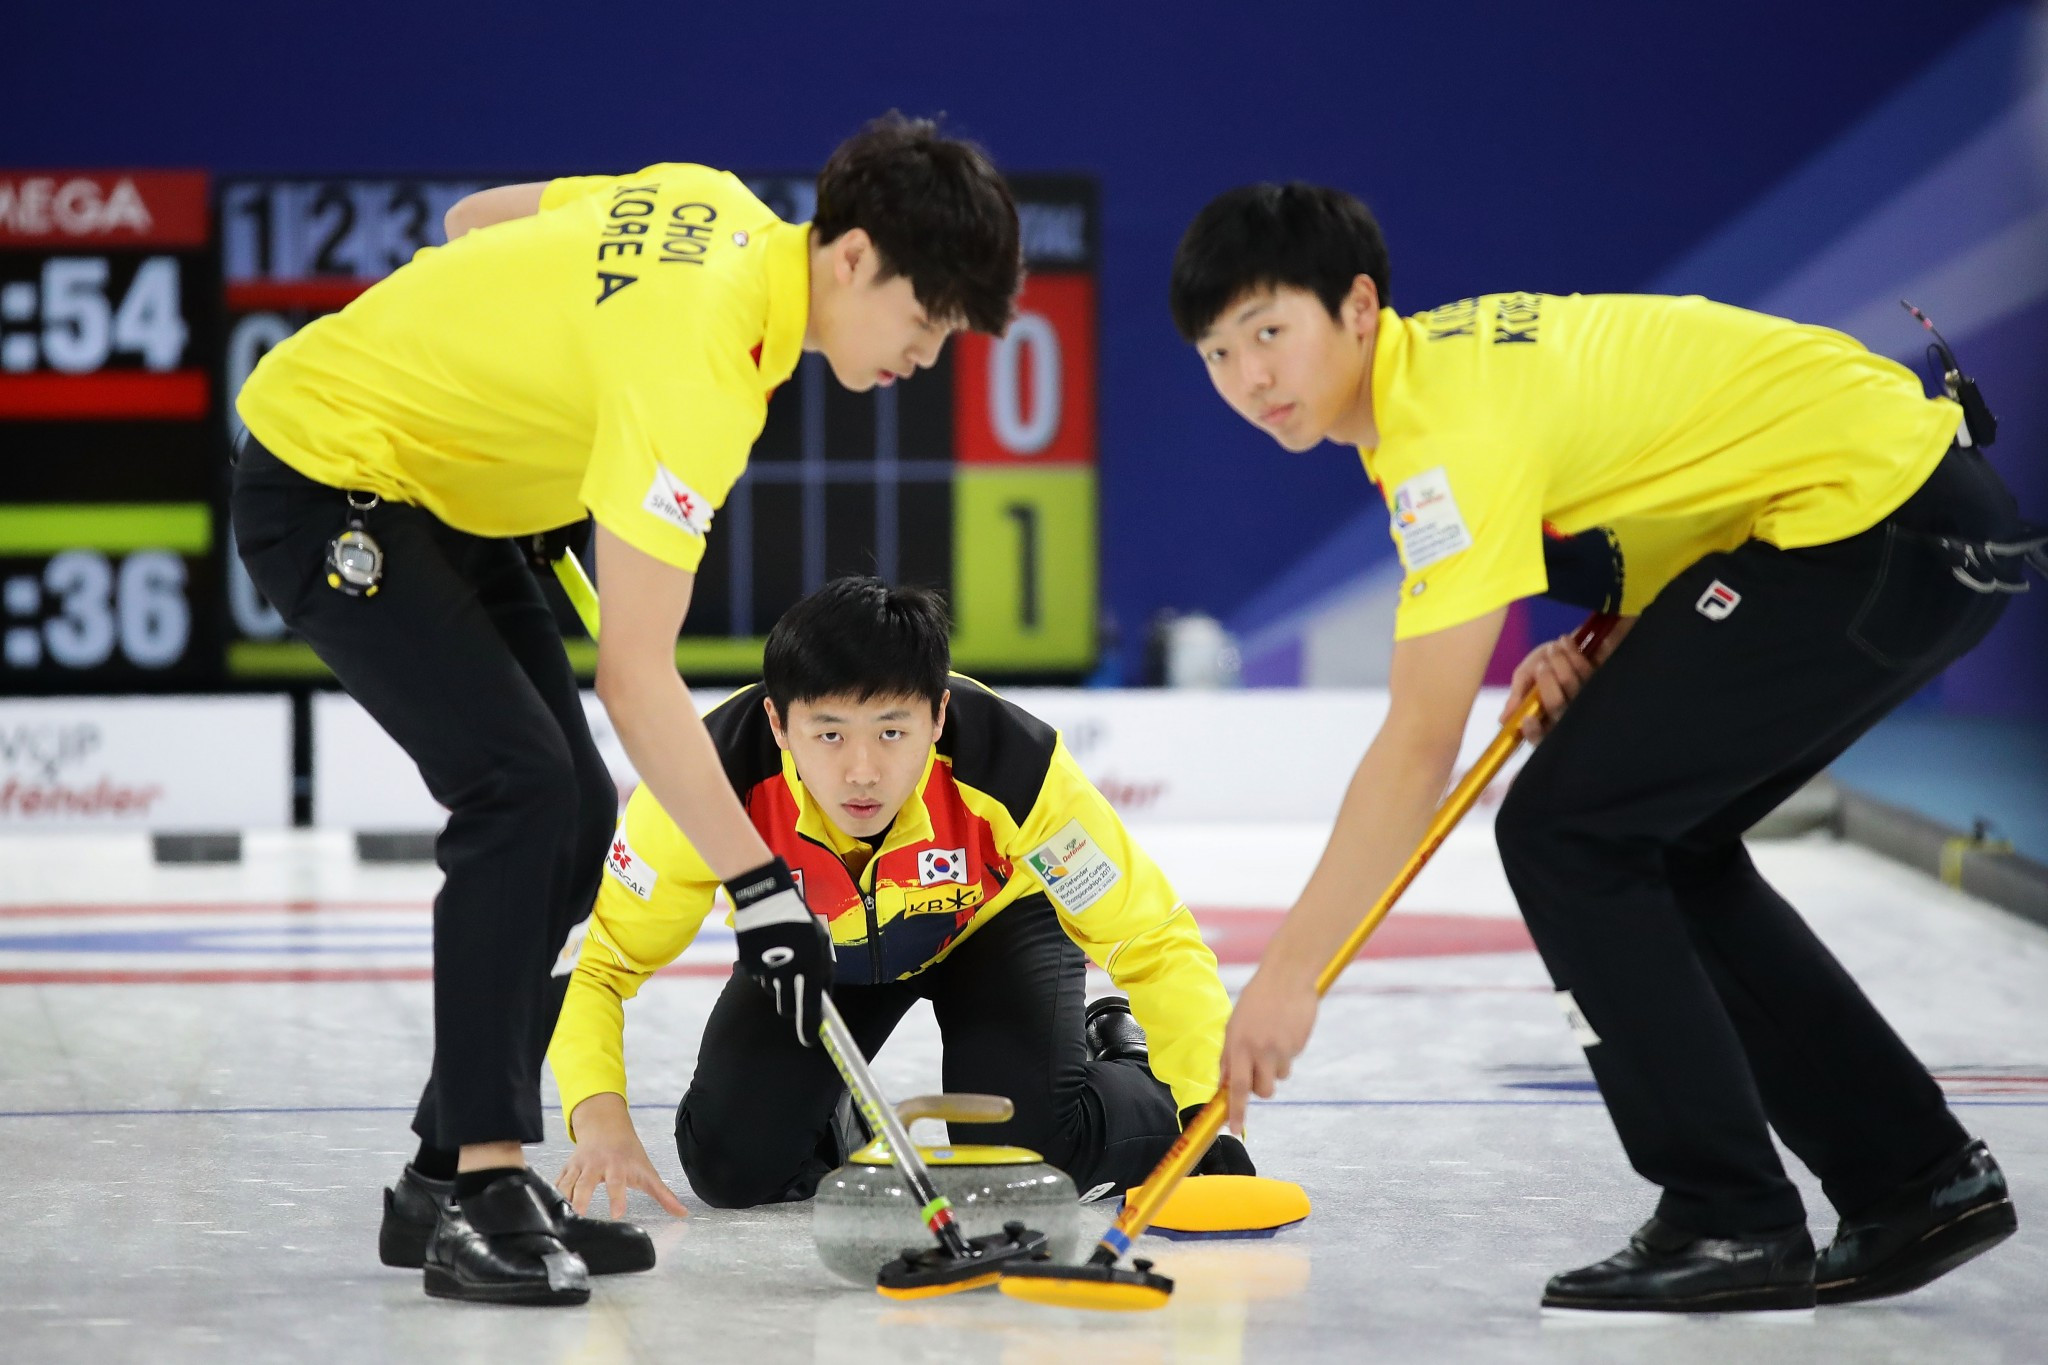 South Korean Sports Ministry to audit curling federation amid governance issues